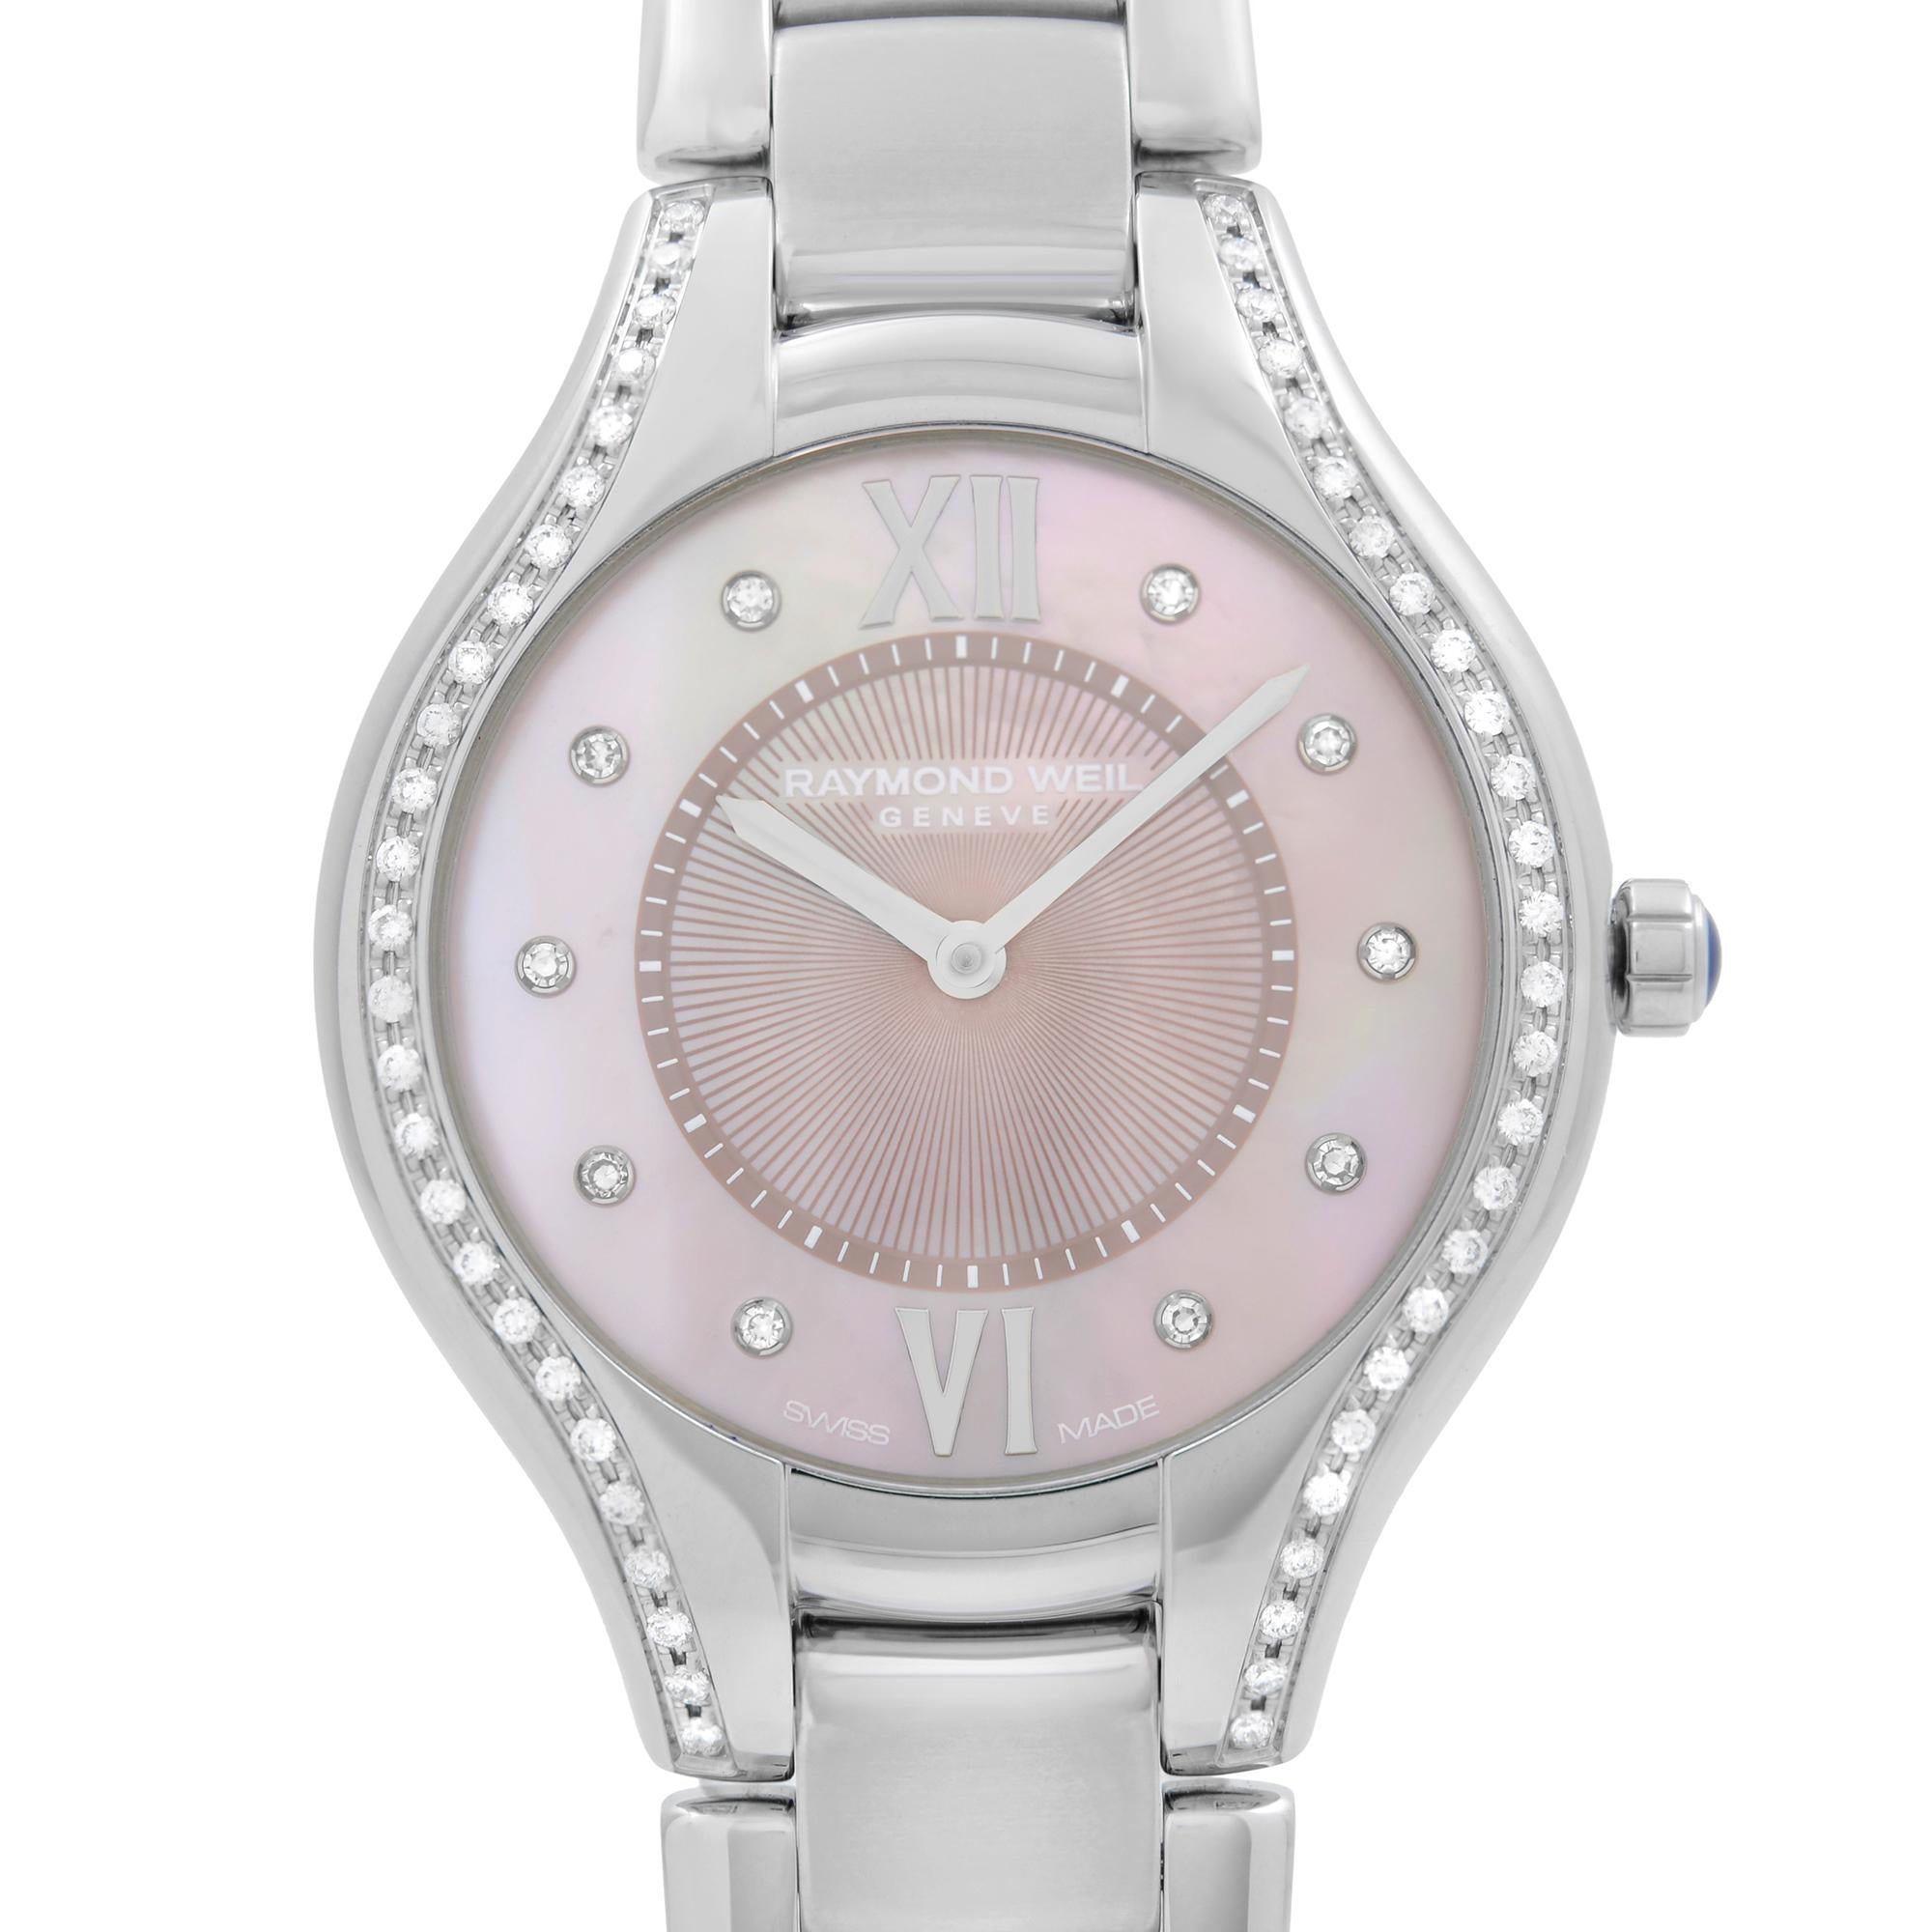 Never Worn Raymond Weil Noemia Steel Diamond Pink MOP Dial Ladies Watch 5132-STS-00986. This Beautiful Timepiece Features: Stainless Steel Case and Bracelet, Fixed Stainless Steel Bezel with Diamond Set, Pink Mother-of-Pearl Dial with Silver-Tone